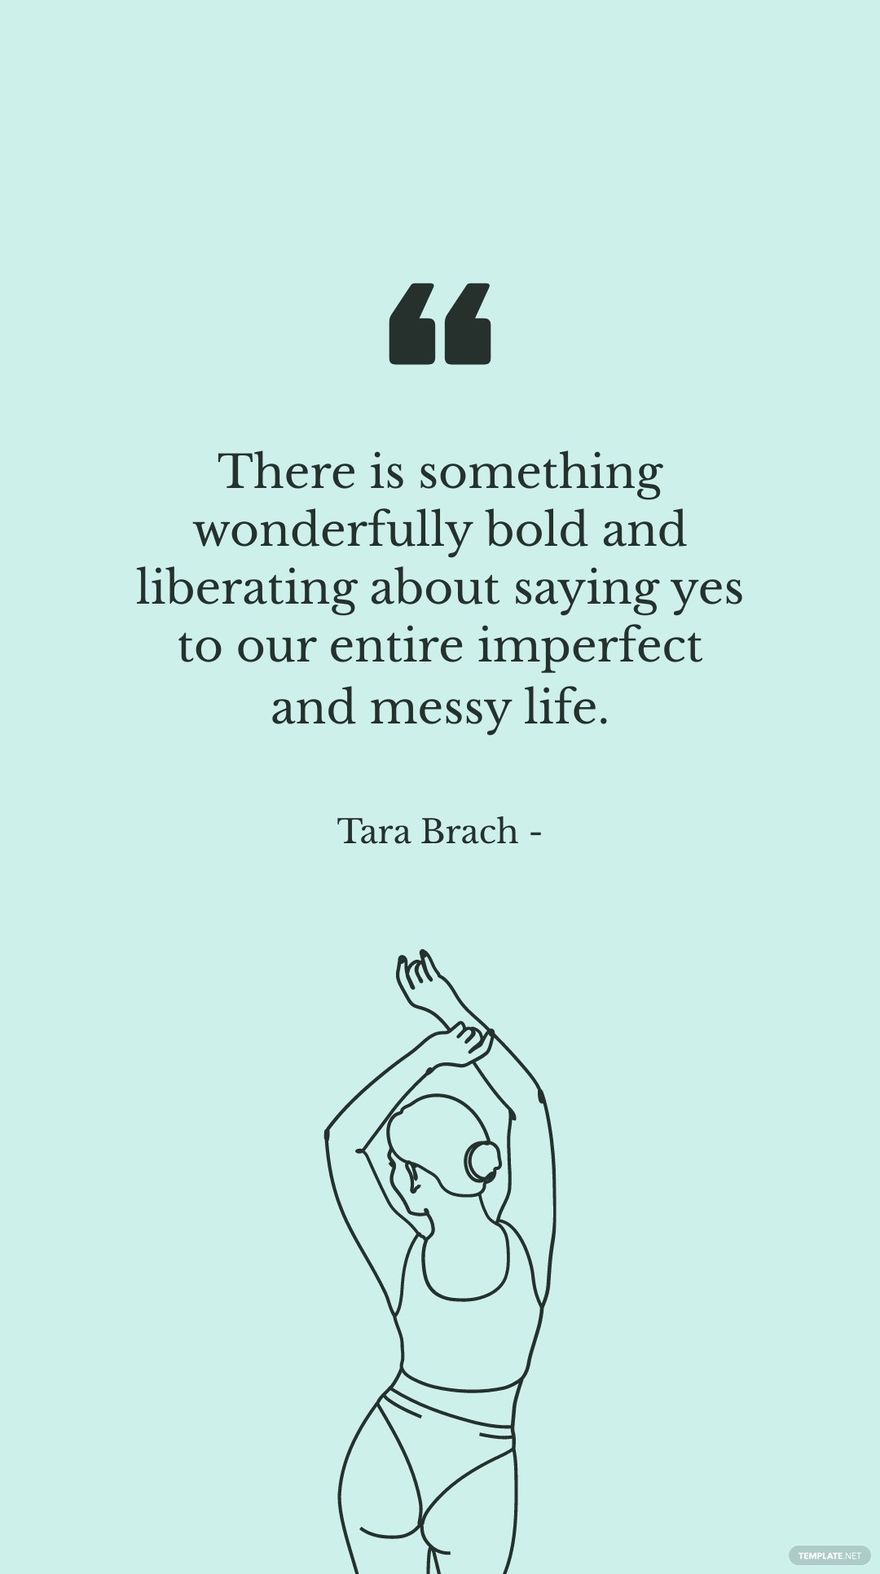 Free Tara Brach - There is something wonderfully bold and liberating about saying yes to our entire imperfect and messy life.